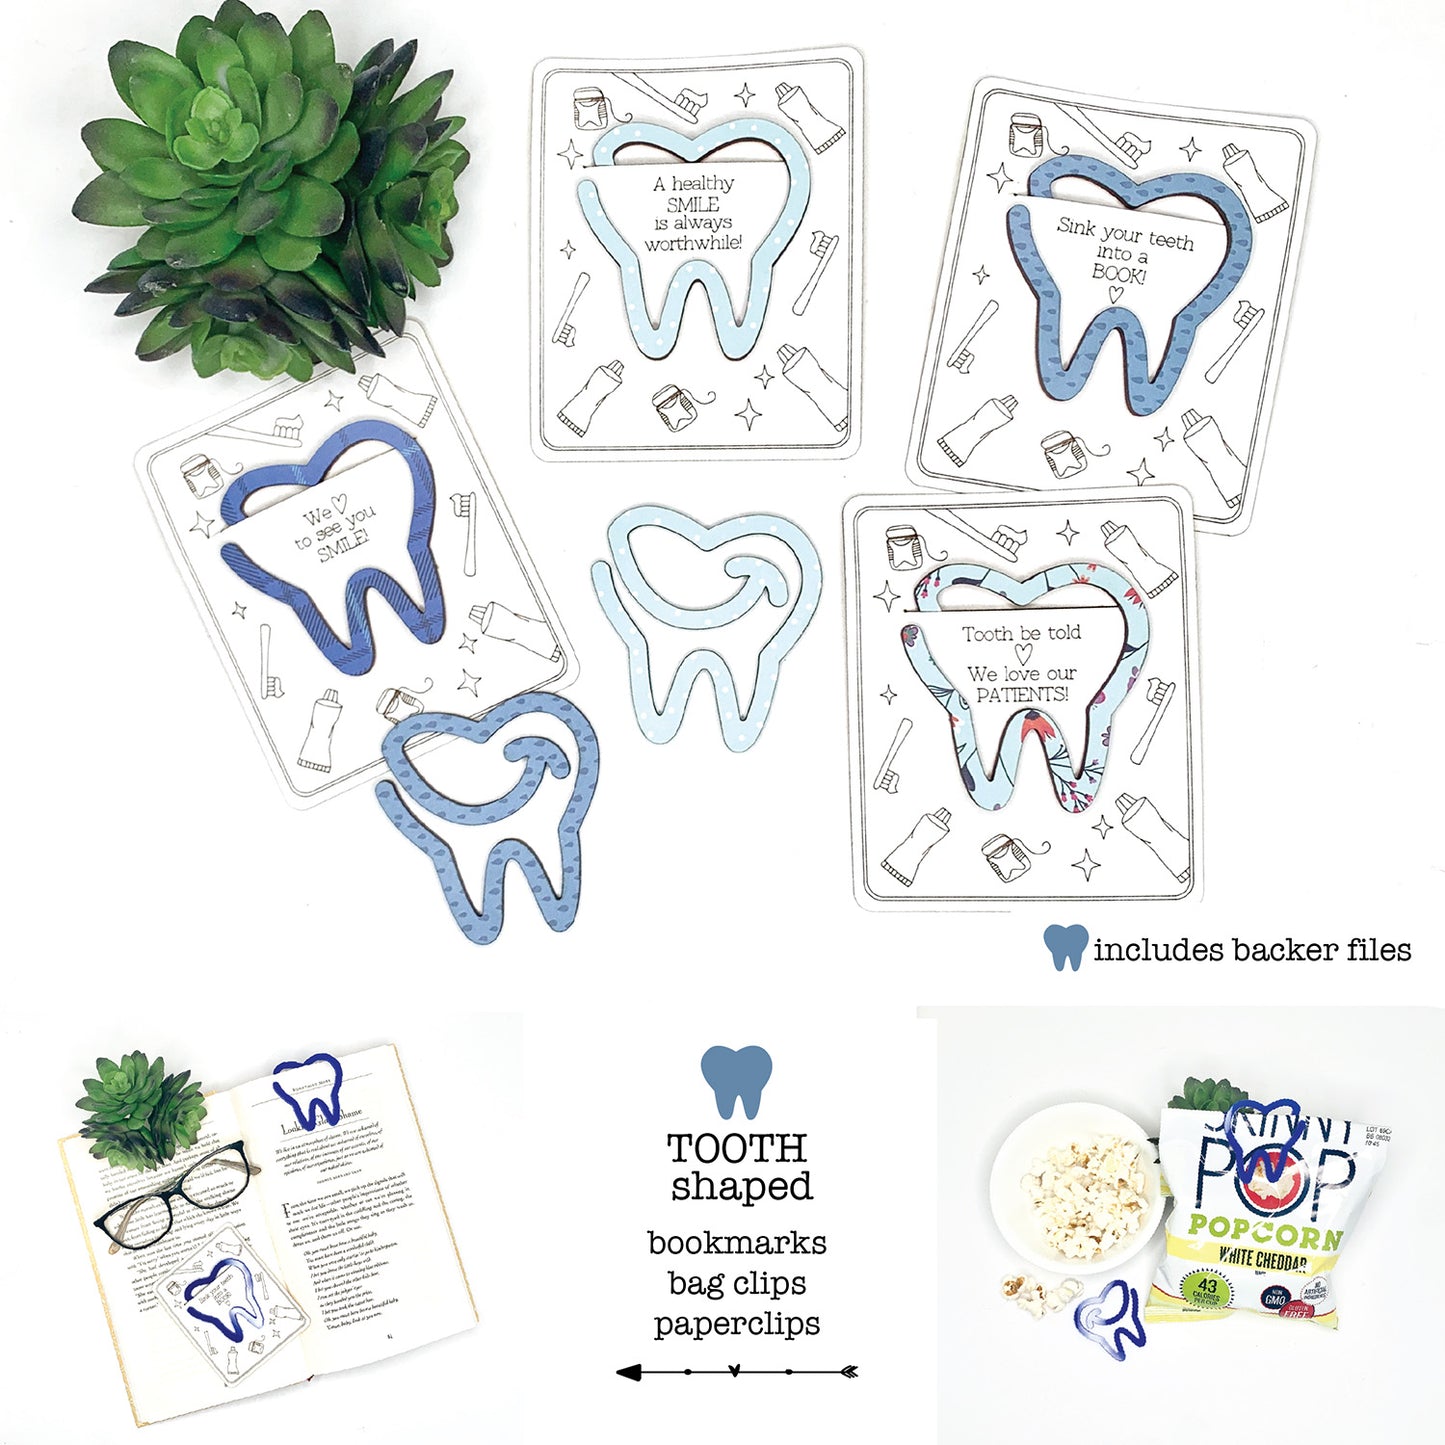 Tooth-Shaped Bookmark with Card Backer - Paperclip - Snack Bag Closure